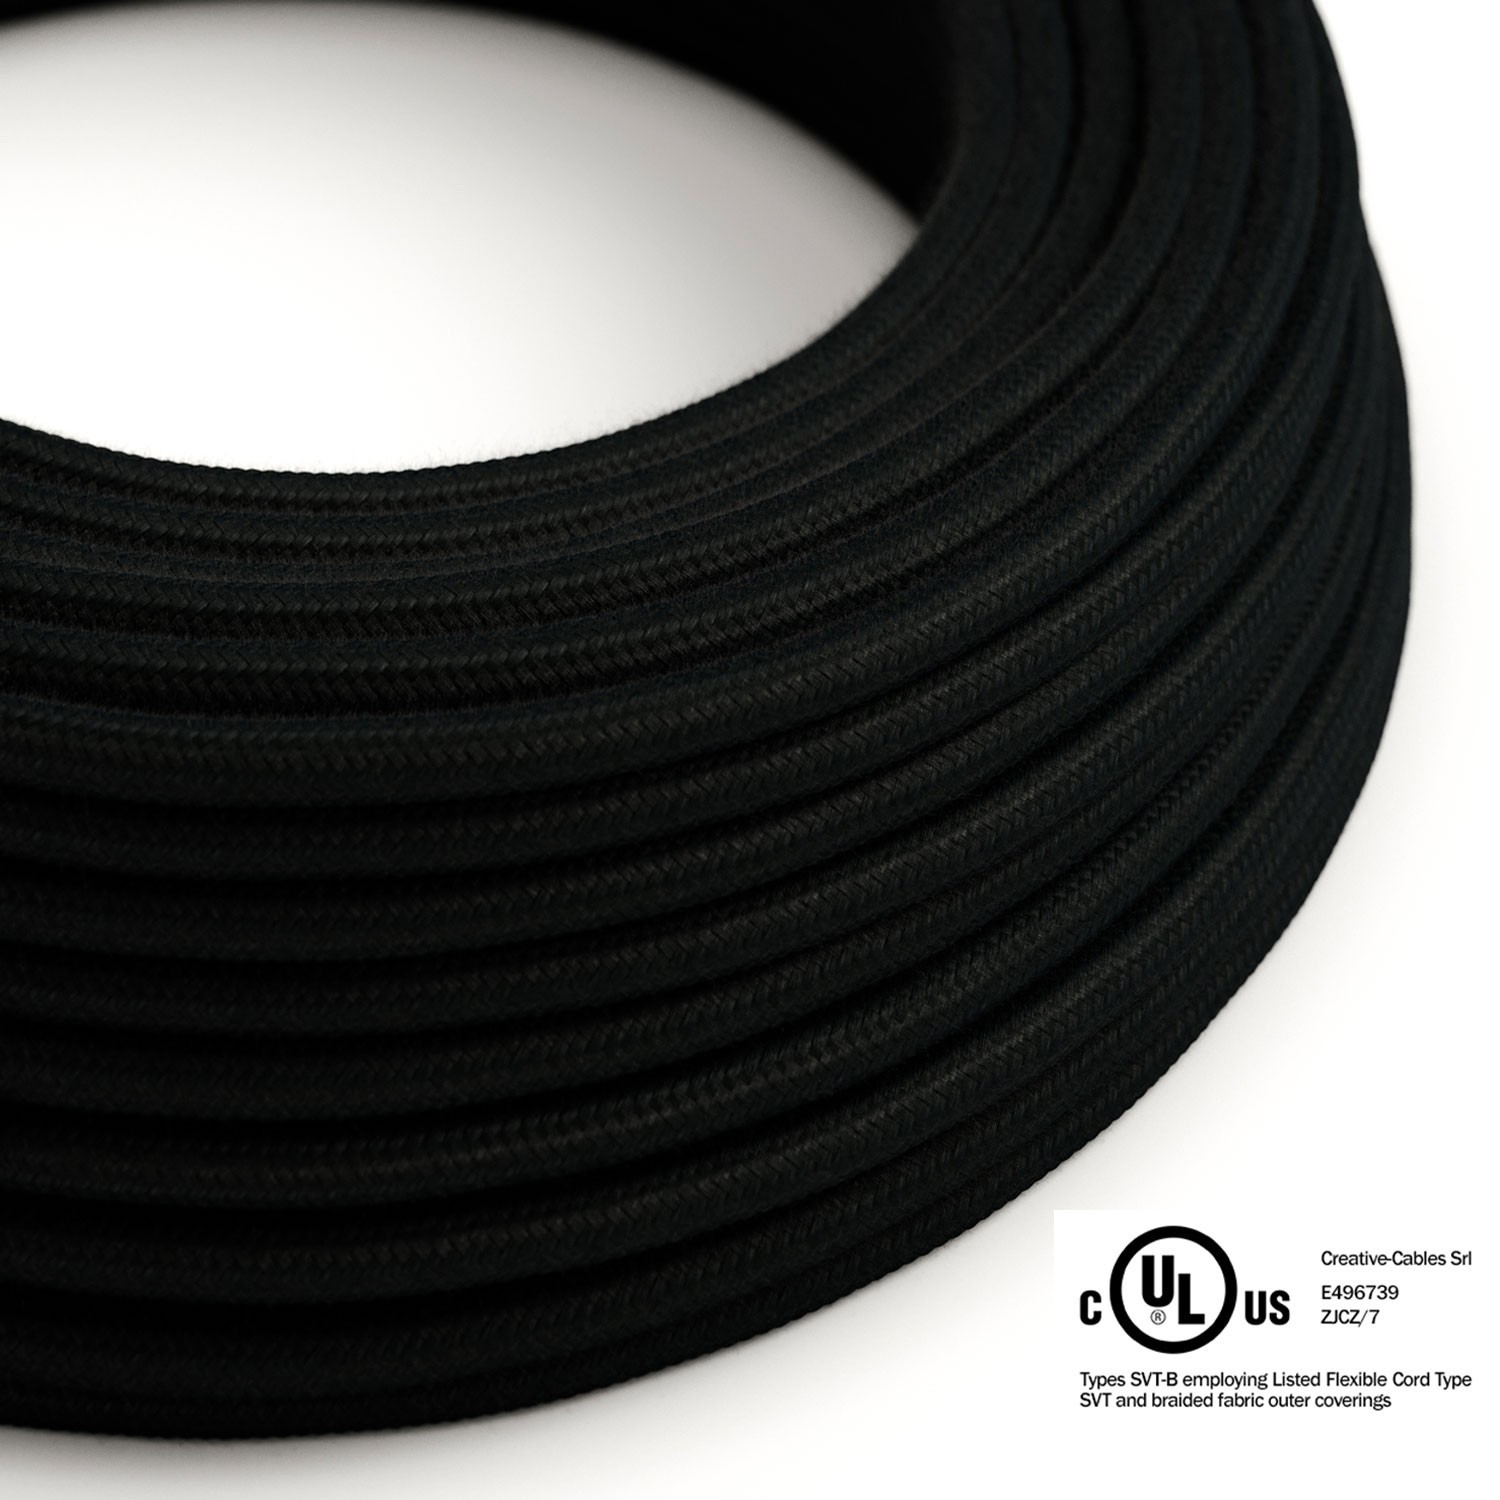 Round Electric Cable 150 ft (45,72 m) coil RC04 Black Cotton - UL listed